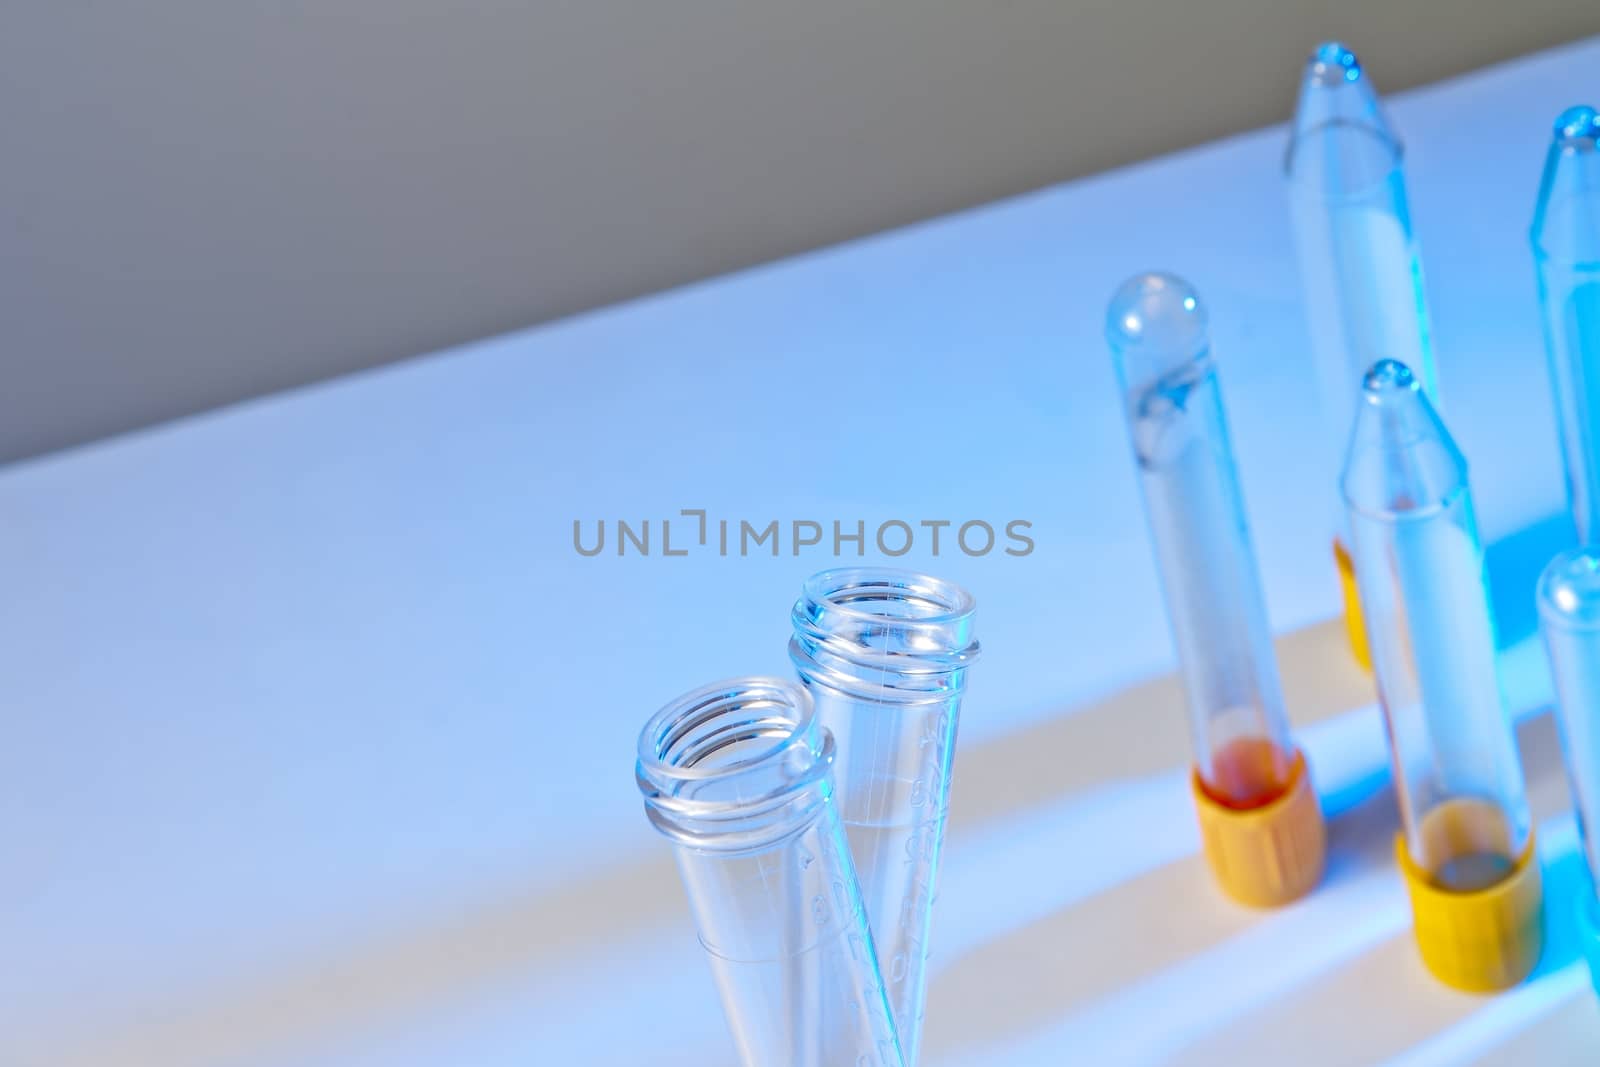 test tubes in front of test tubes on table in laboratory  by donfiore